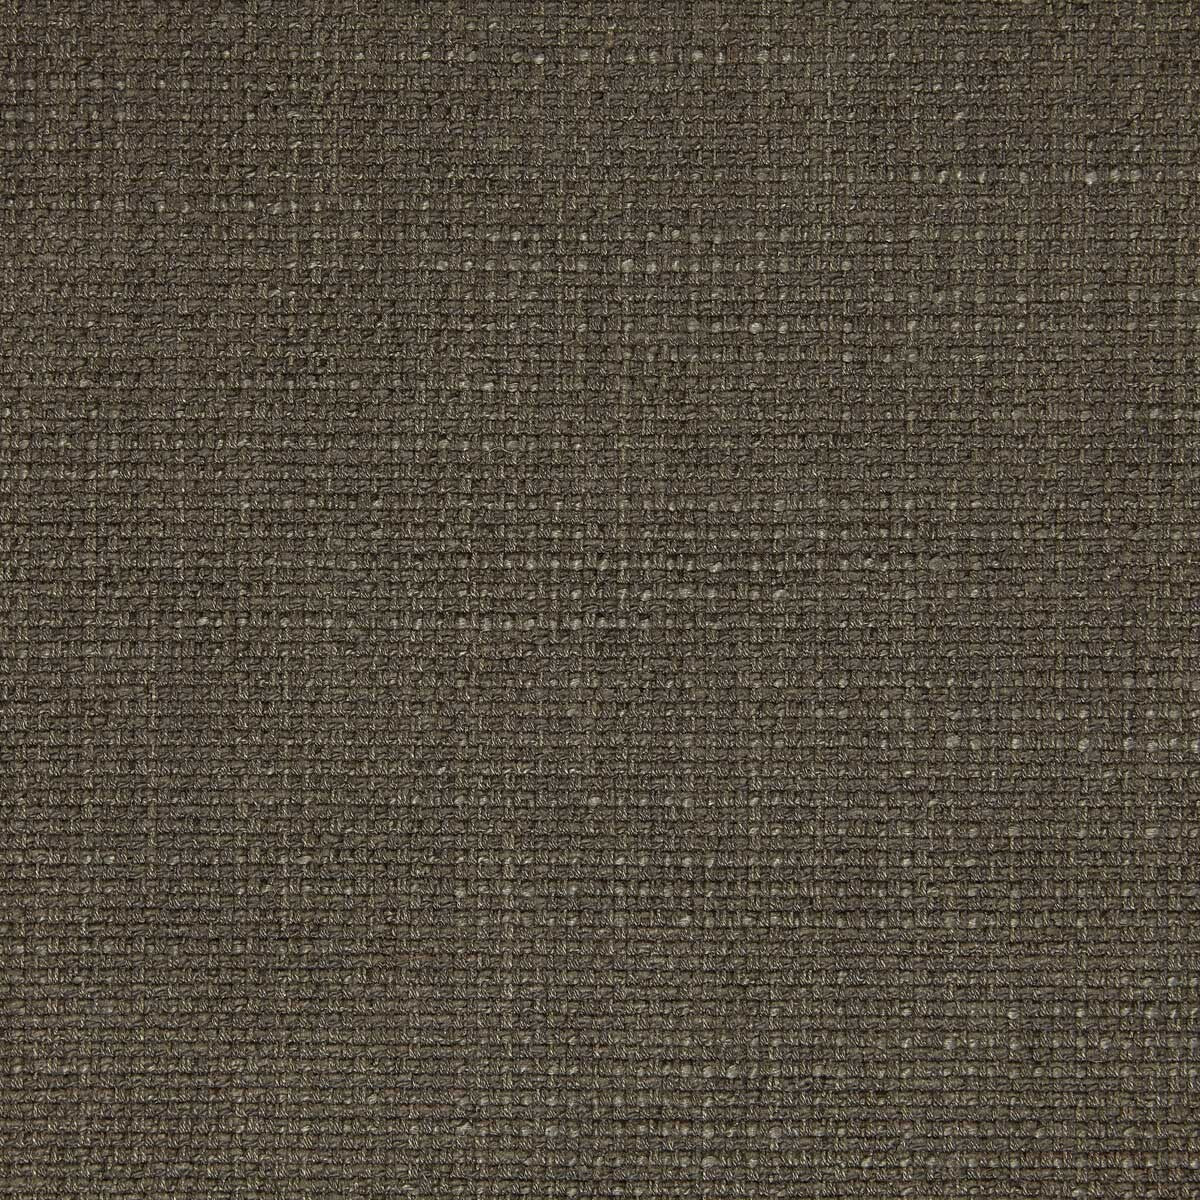 Godai fabric in 11 color - pattern LZ-30349.11.0 - by Kravet Design in the Lizzo collection